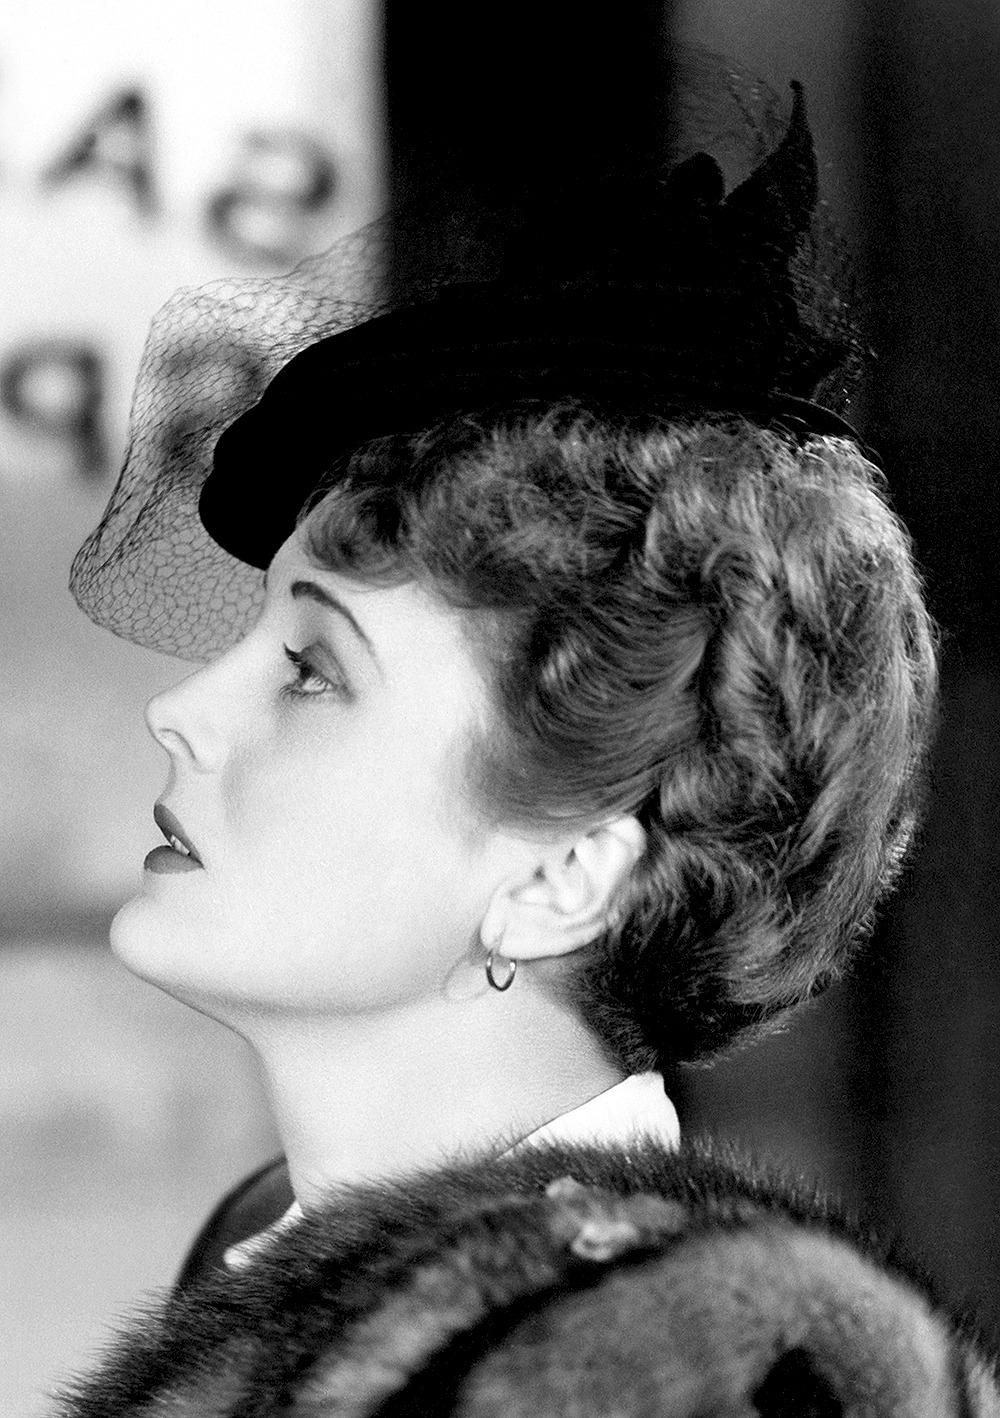 Mary Astor in The Maltese Falcon  (John Huston, 1941)A favorite actress in a favorite film